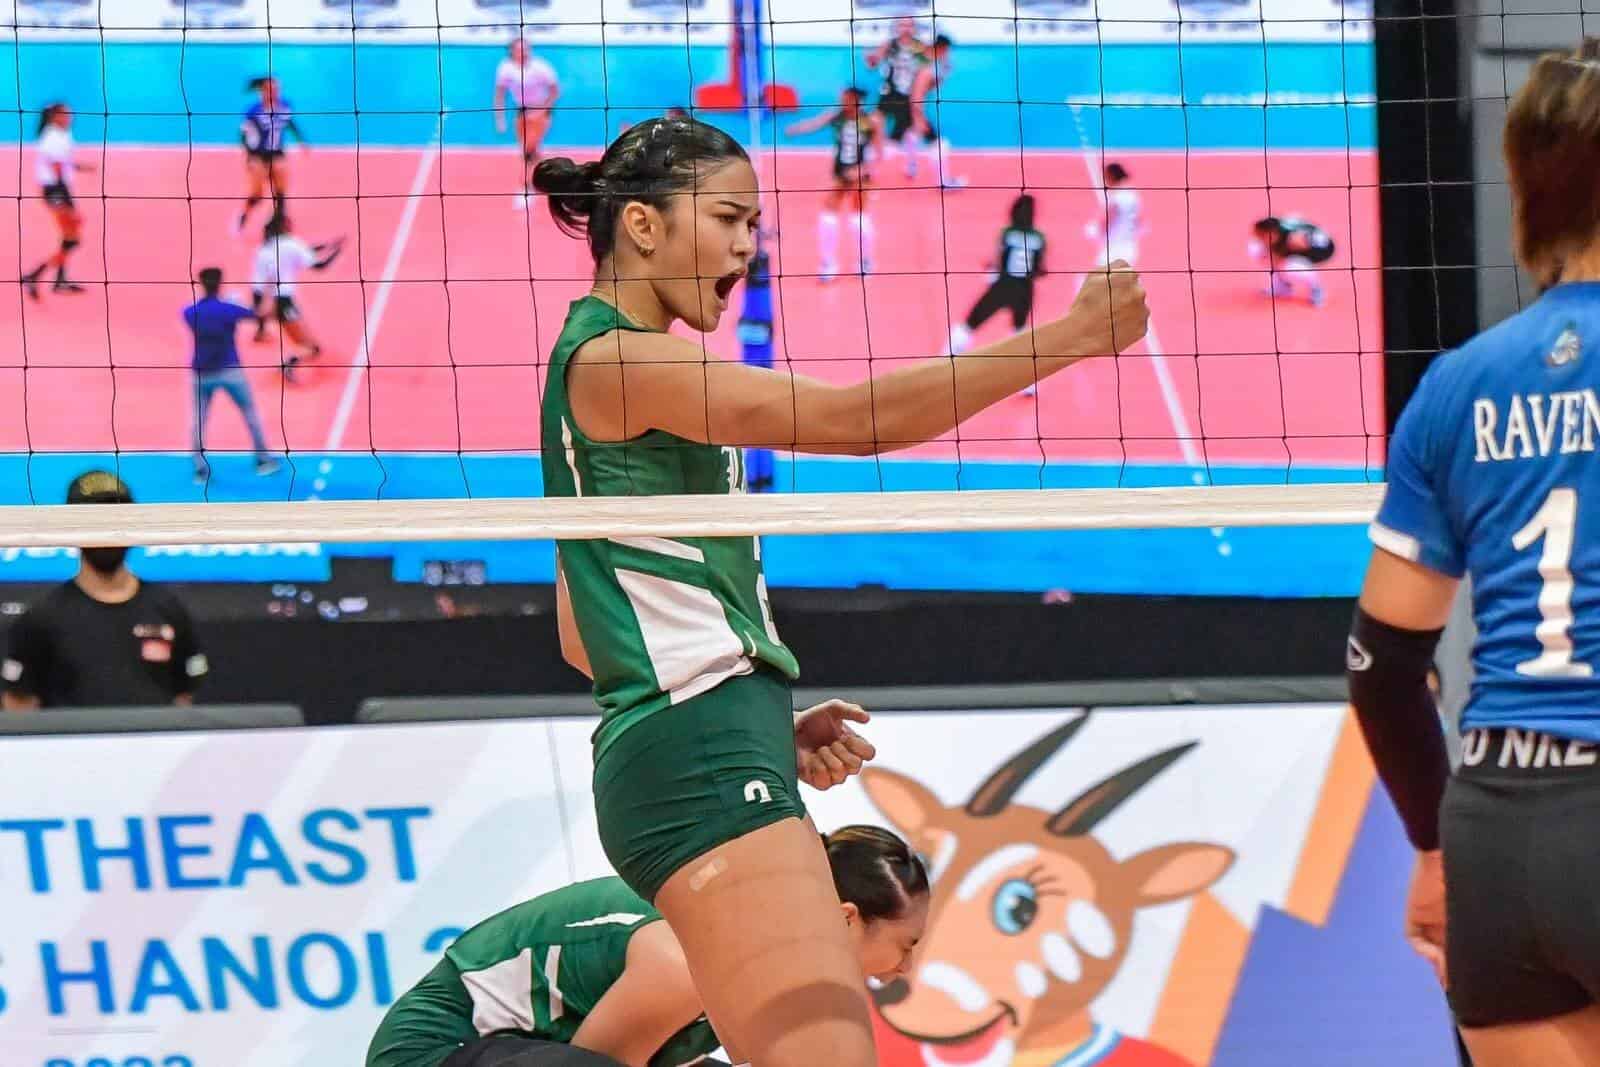 La Salle reasserts mastery over Ateneo de Manila University in UAAP women’s volleyball with a victory.